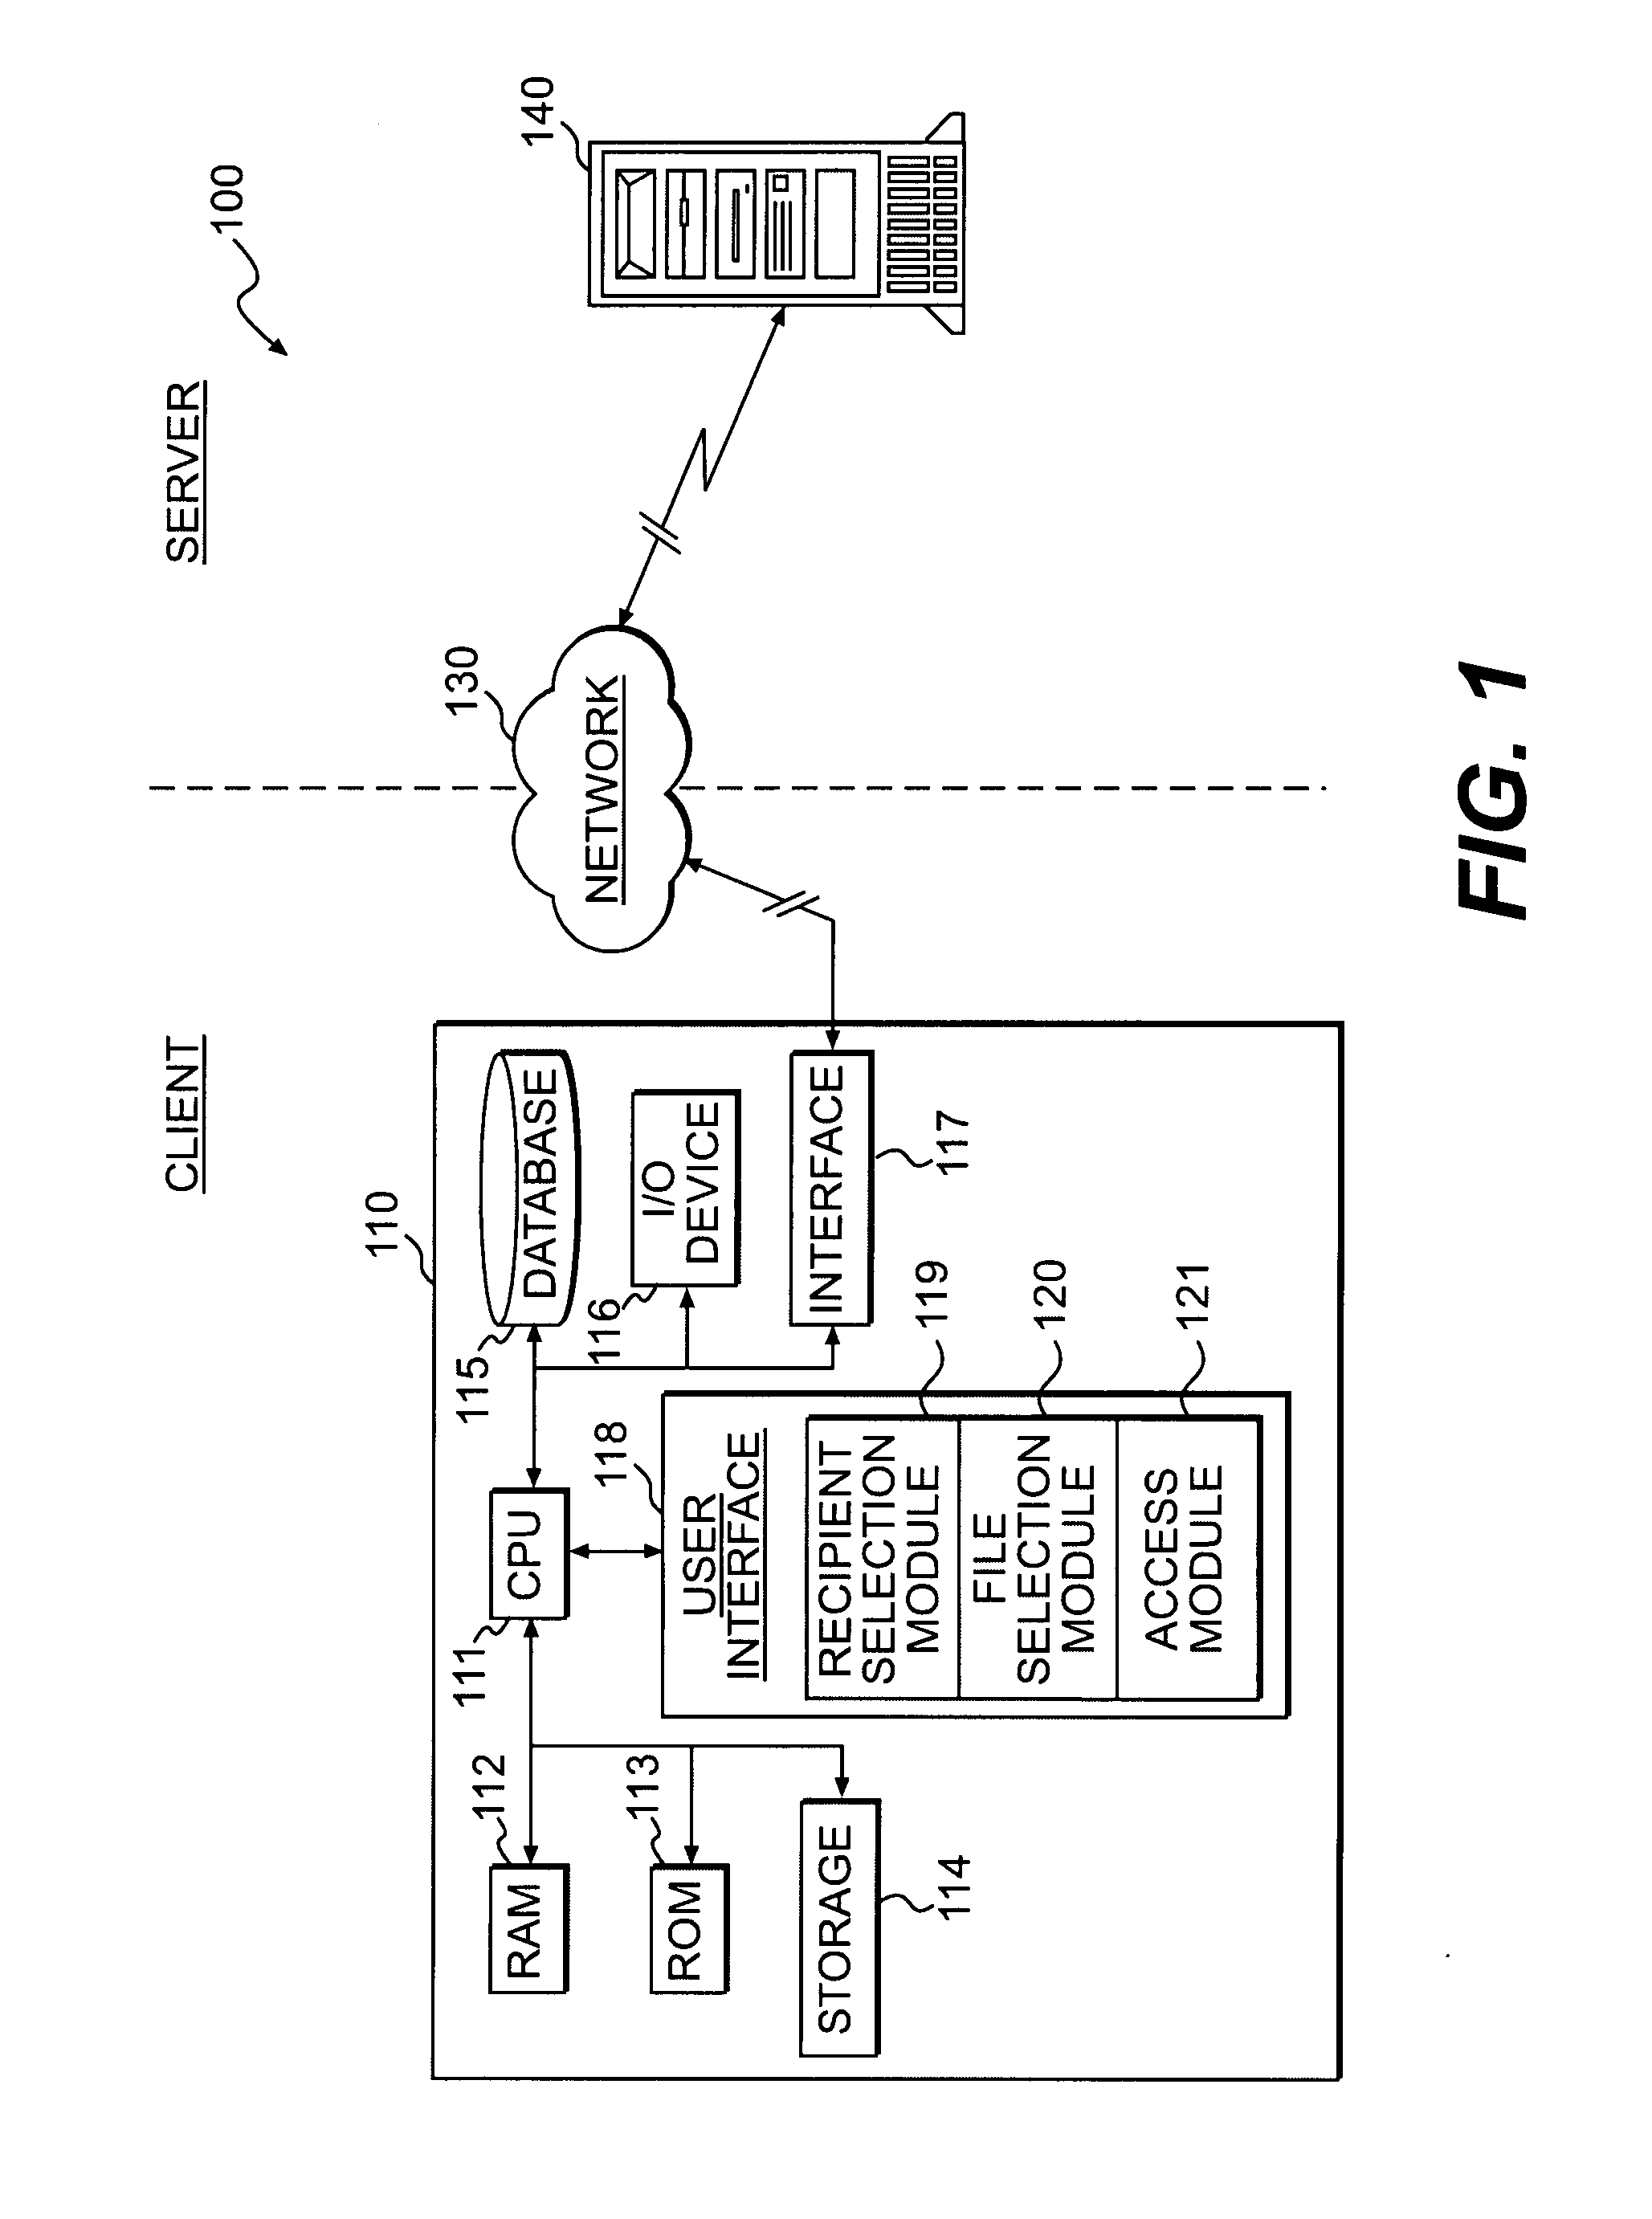 System and method for secure file transfer